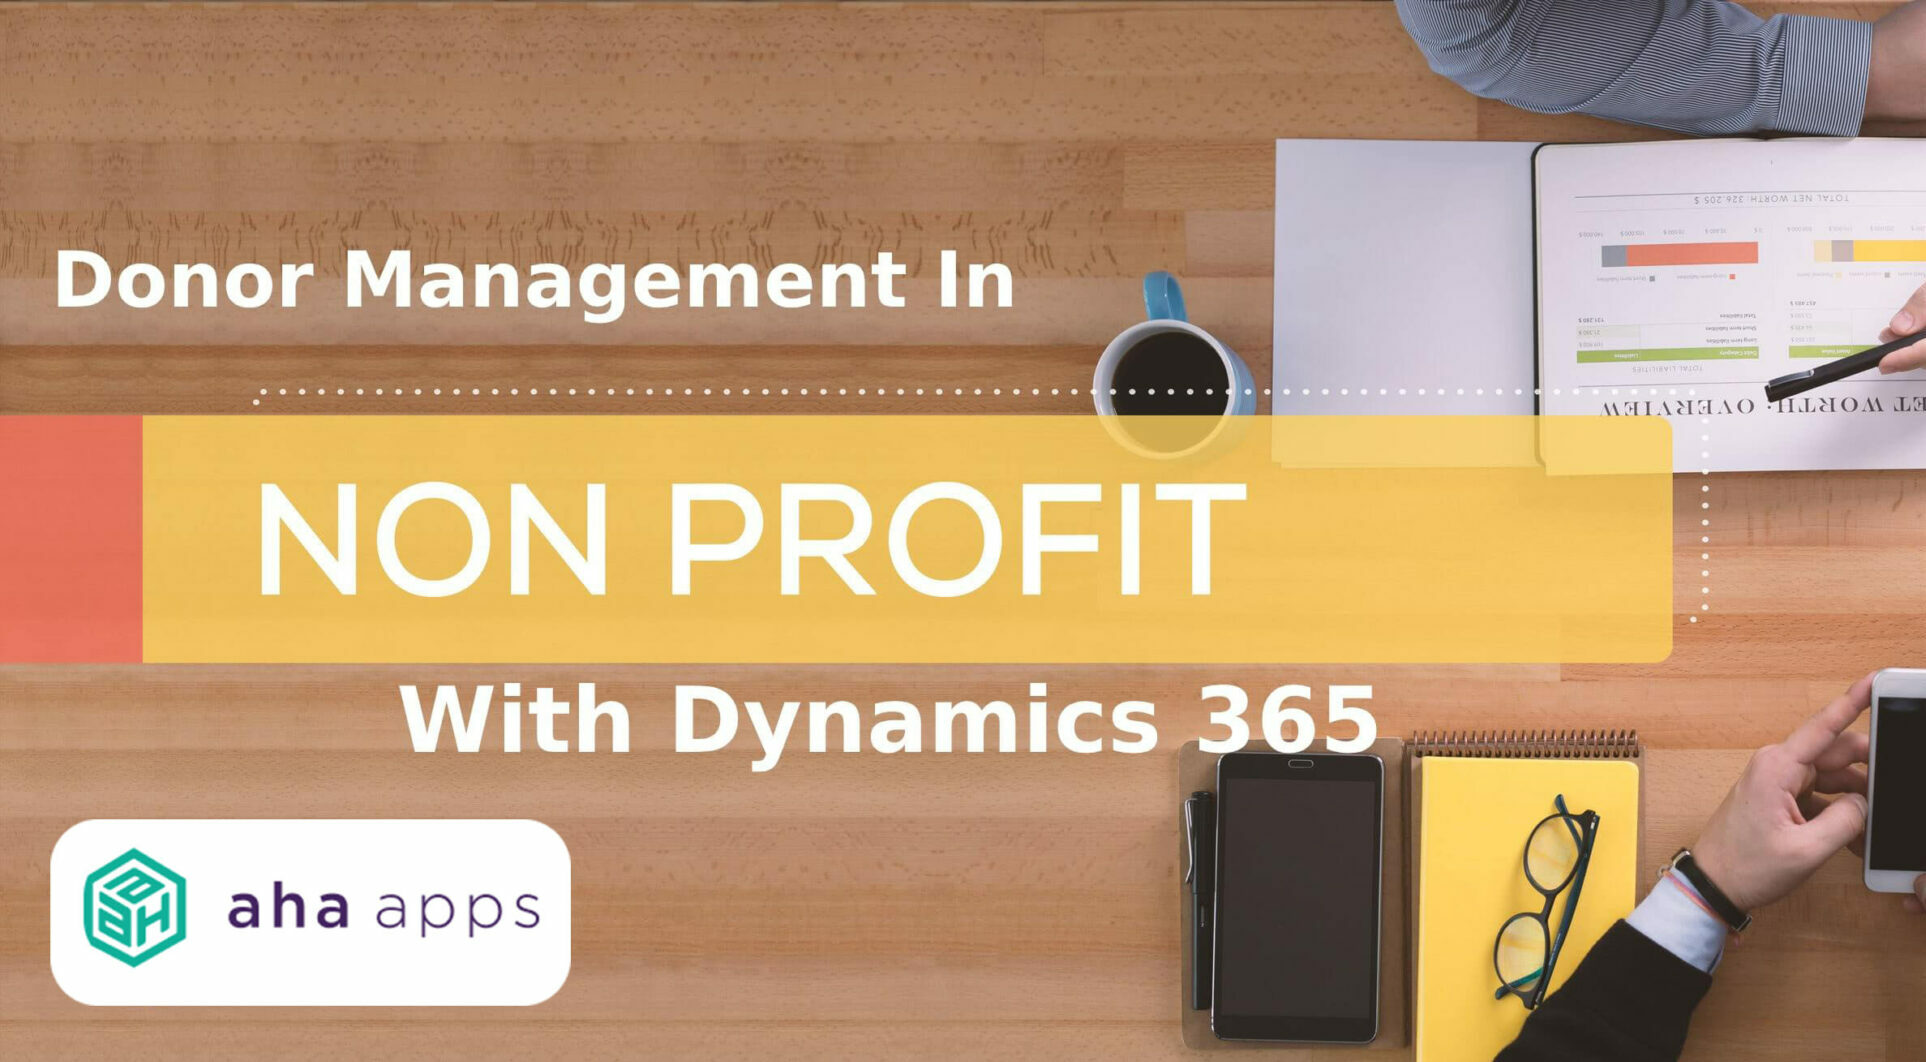 Donor Management in Nonprofits with Dynamics 365 - AhaApps